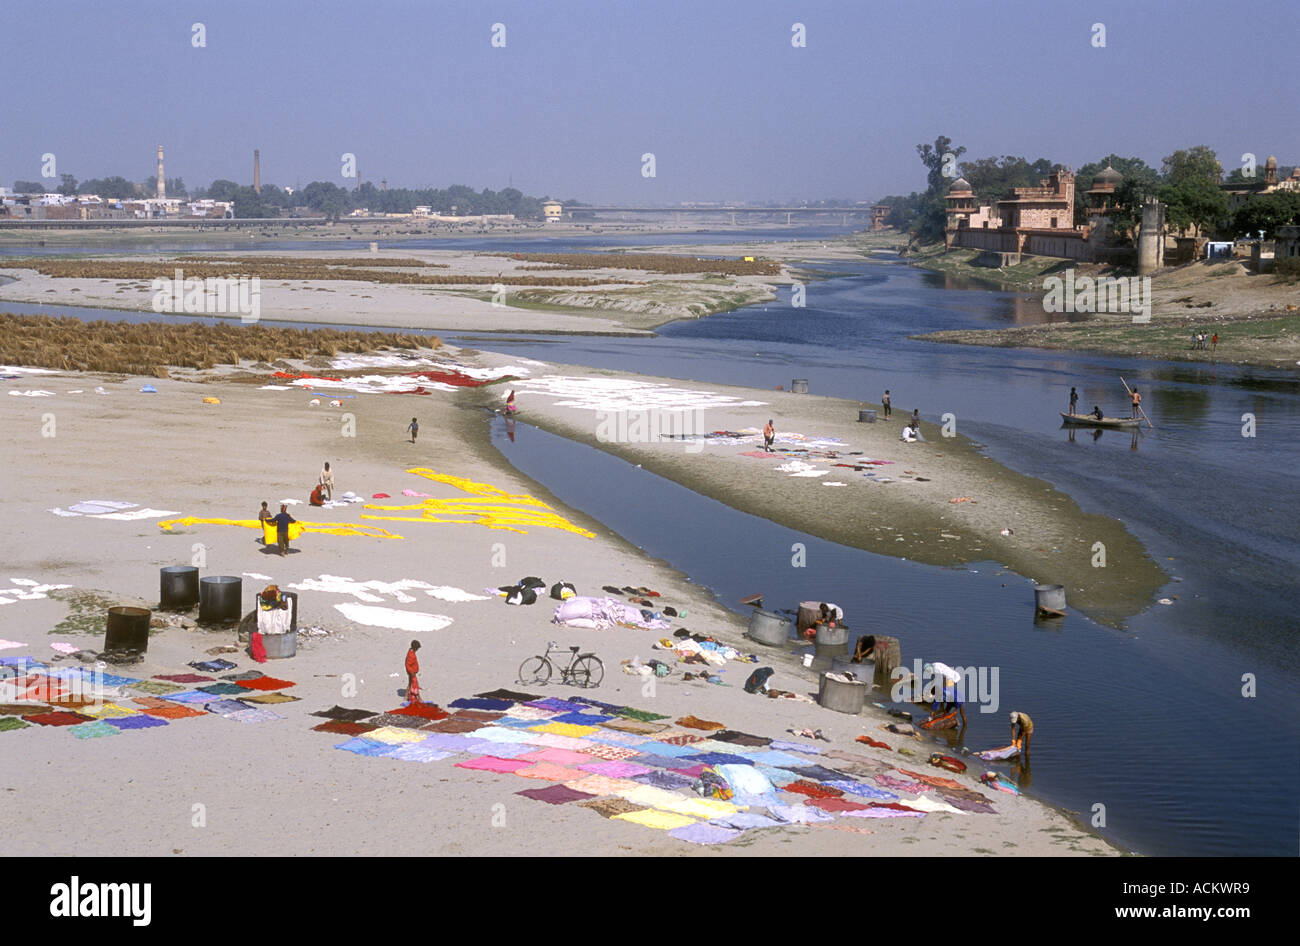 Laundry spread out to dry in the hot sunshine on the sandy banks of the Yamuna River Agra Uttar Pradesh India Stock Photo